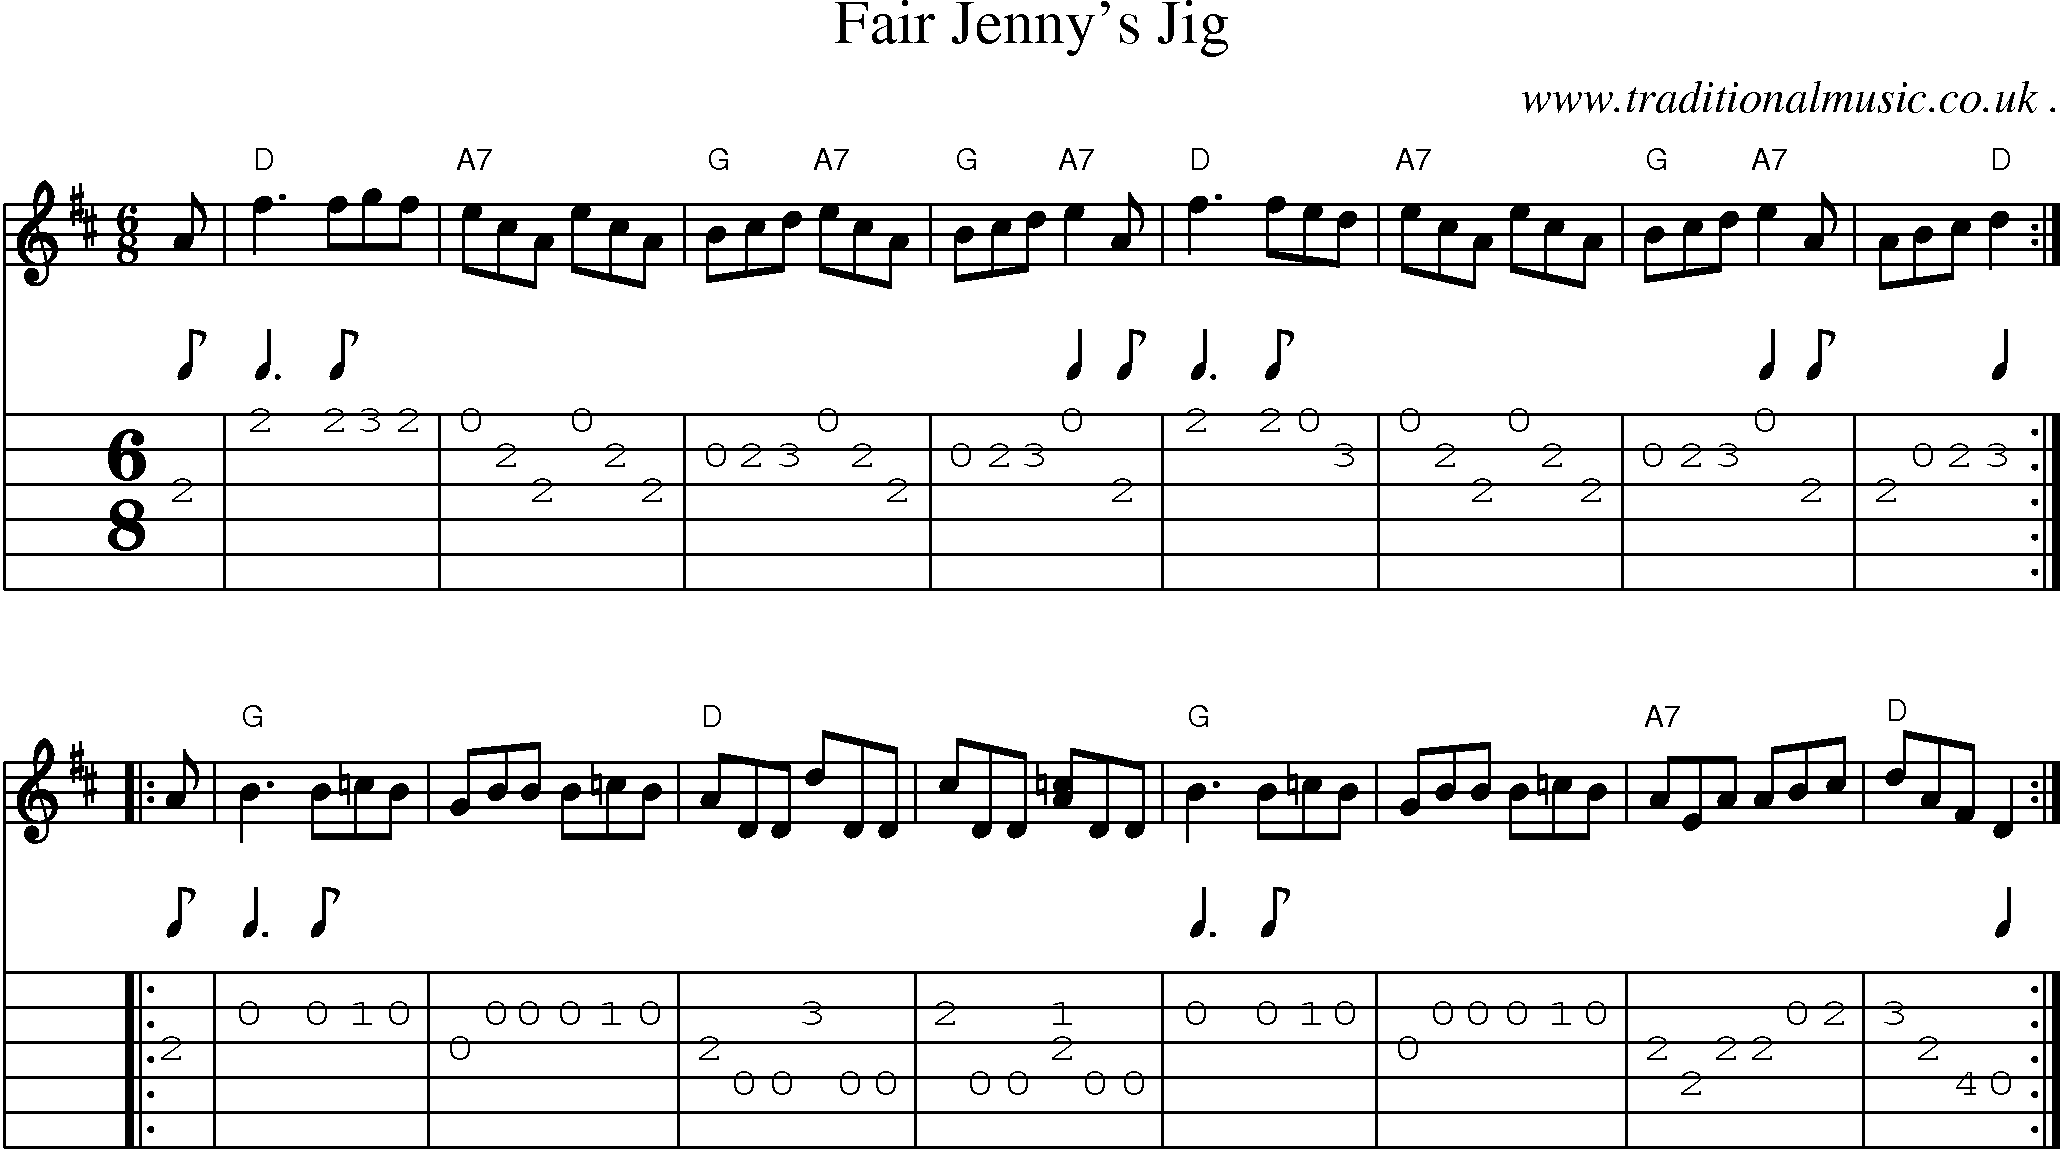 Sheet-music  score, Chords and Guitar Tabs for Fair Jennys Jig